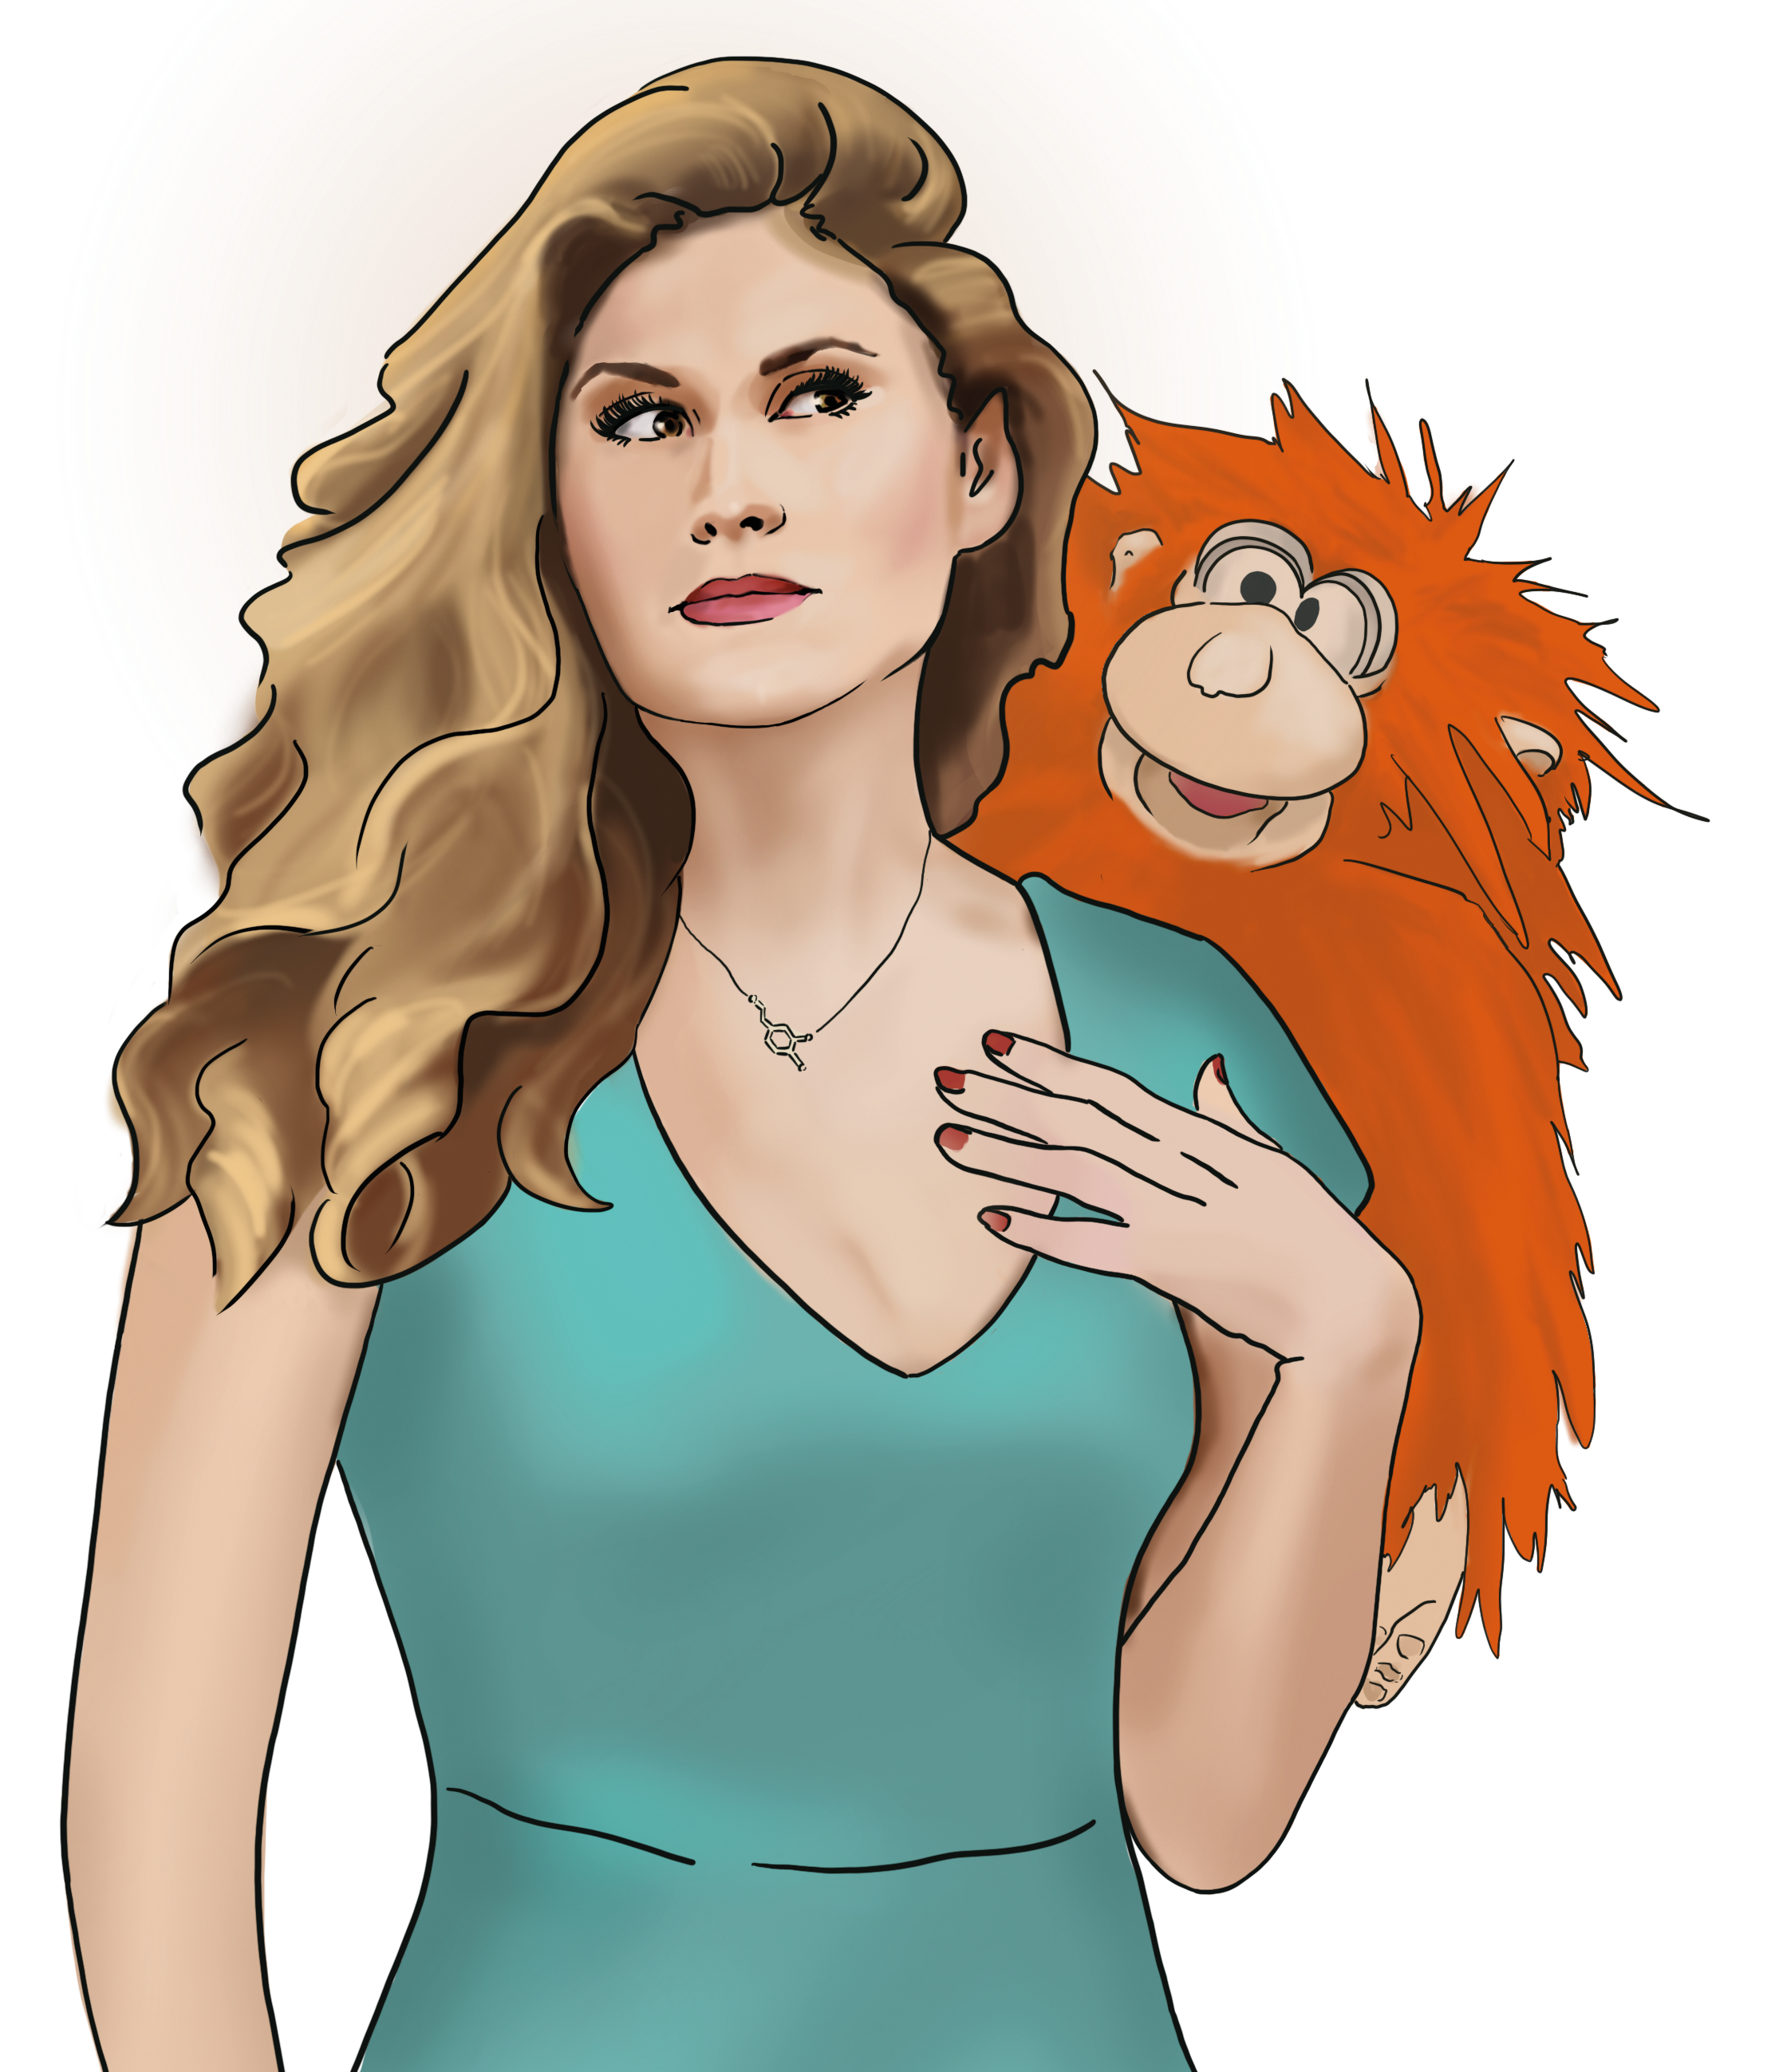 Drawing of a woman with an orangutan puppet